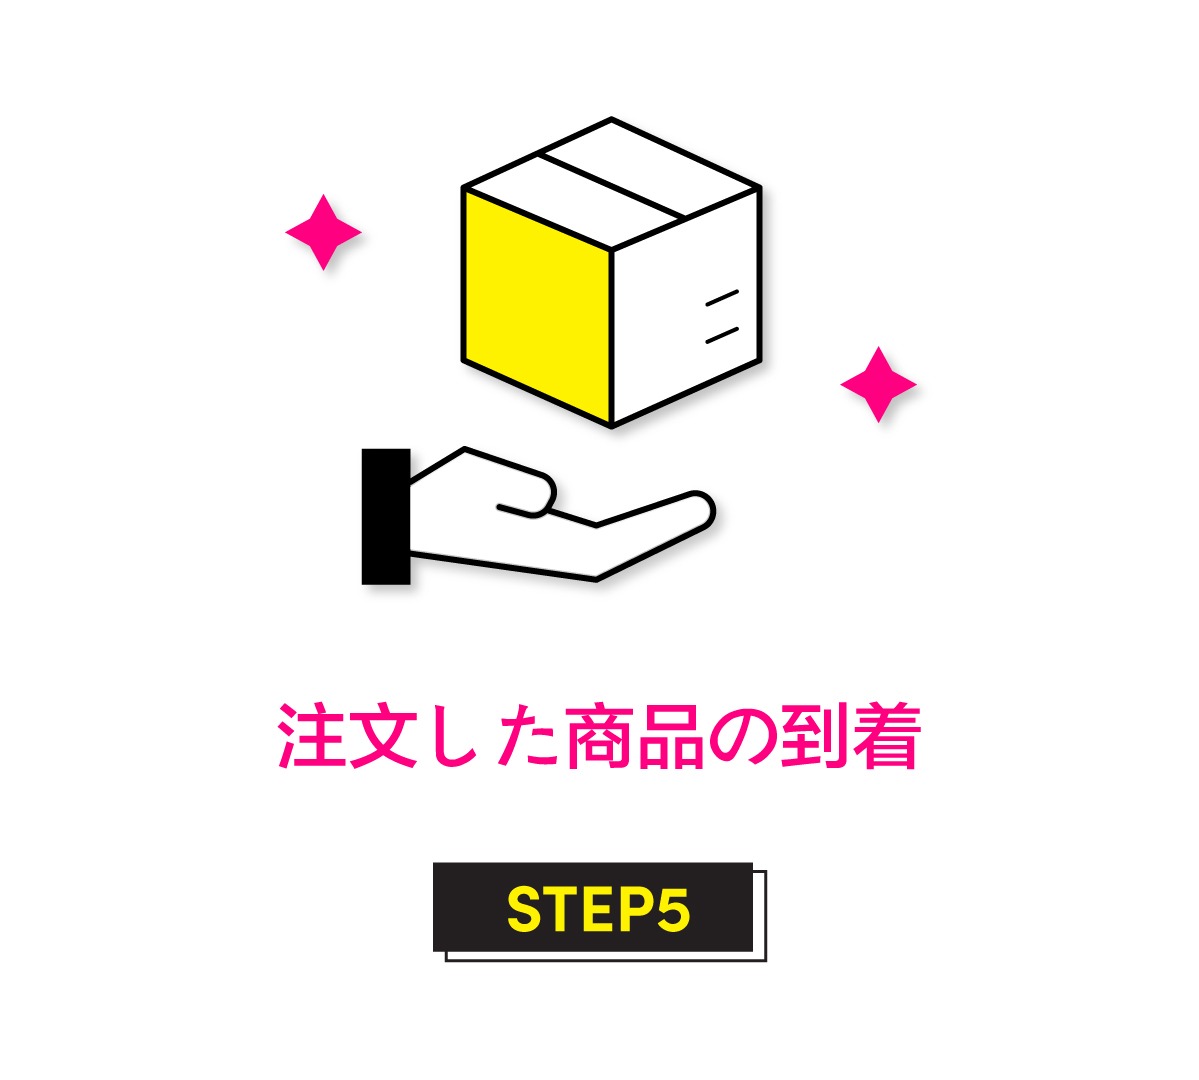 how-to-card-jp5